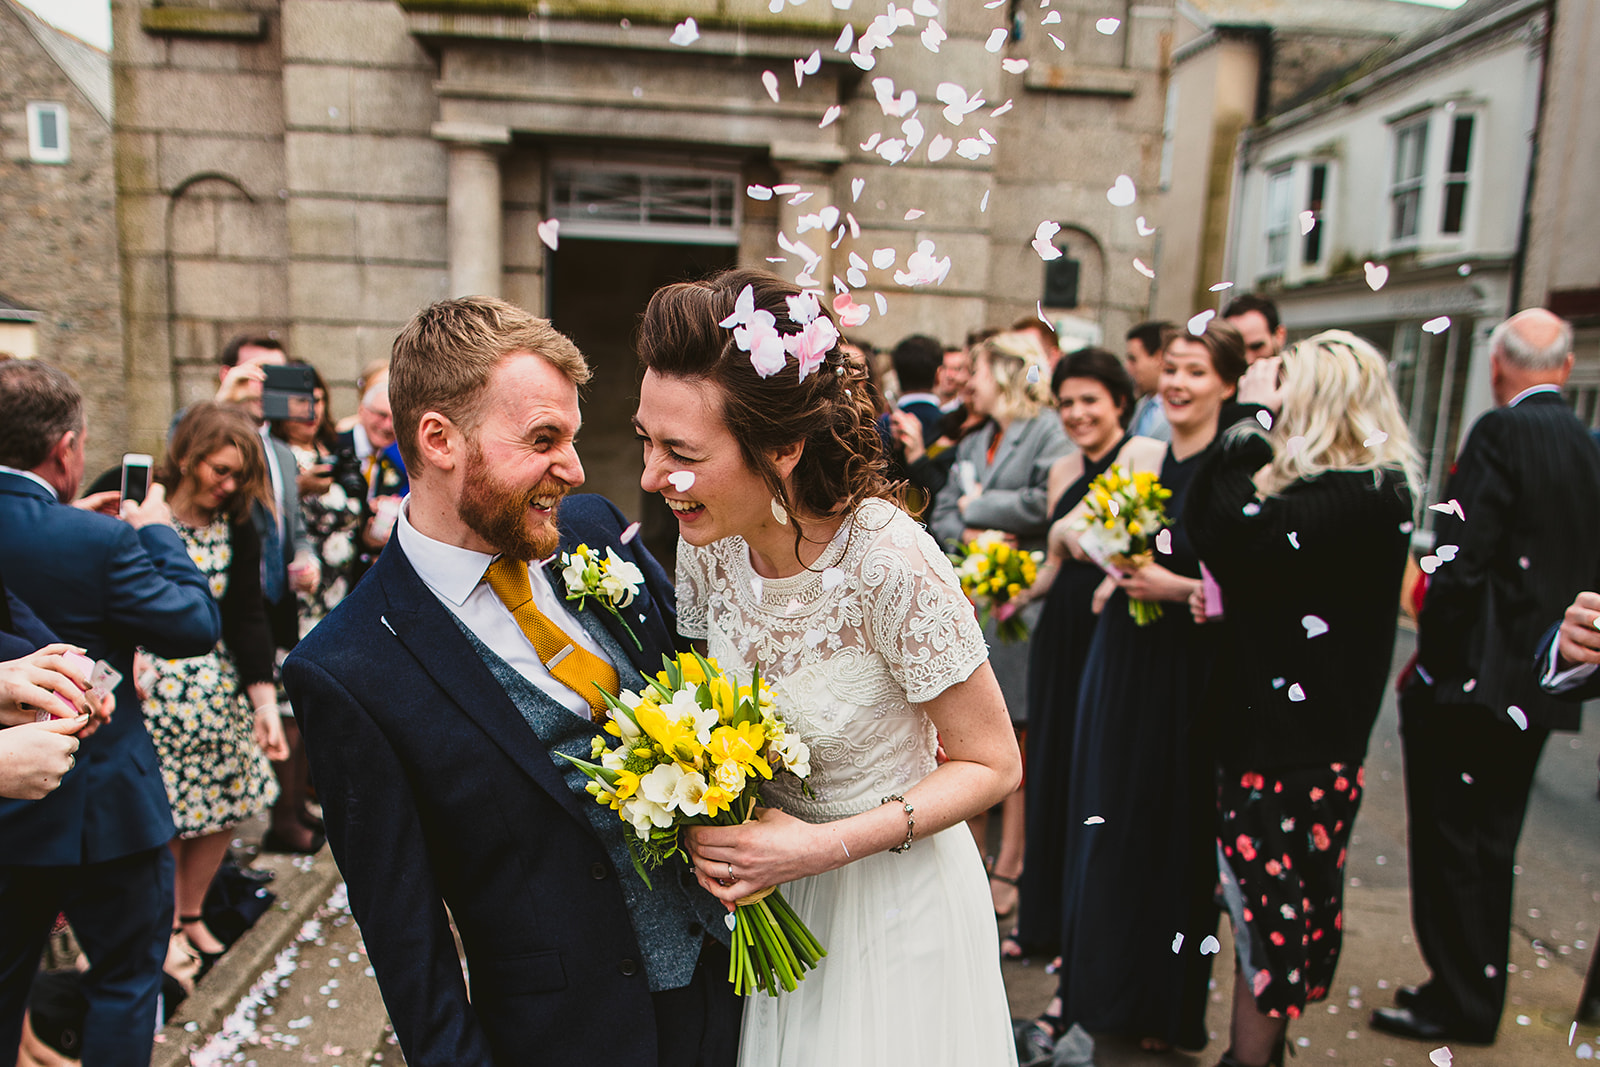 Wedding Ceremony at Penryn Town Hall